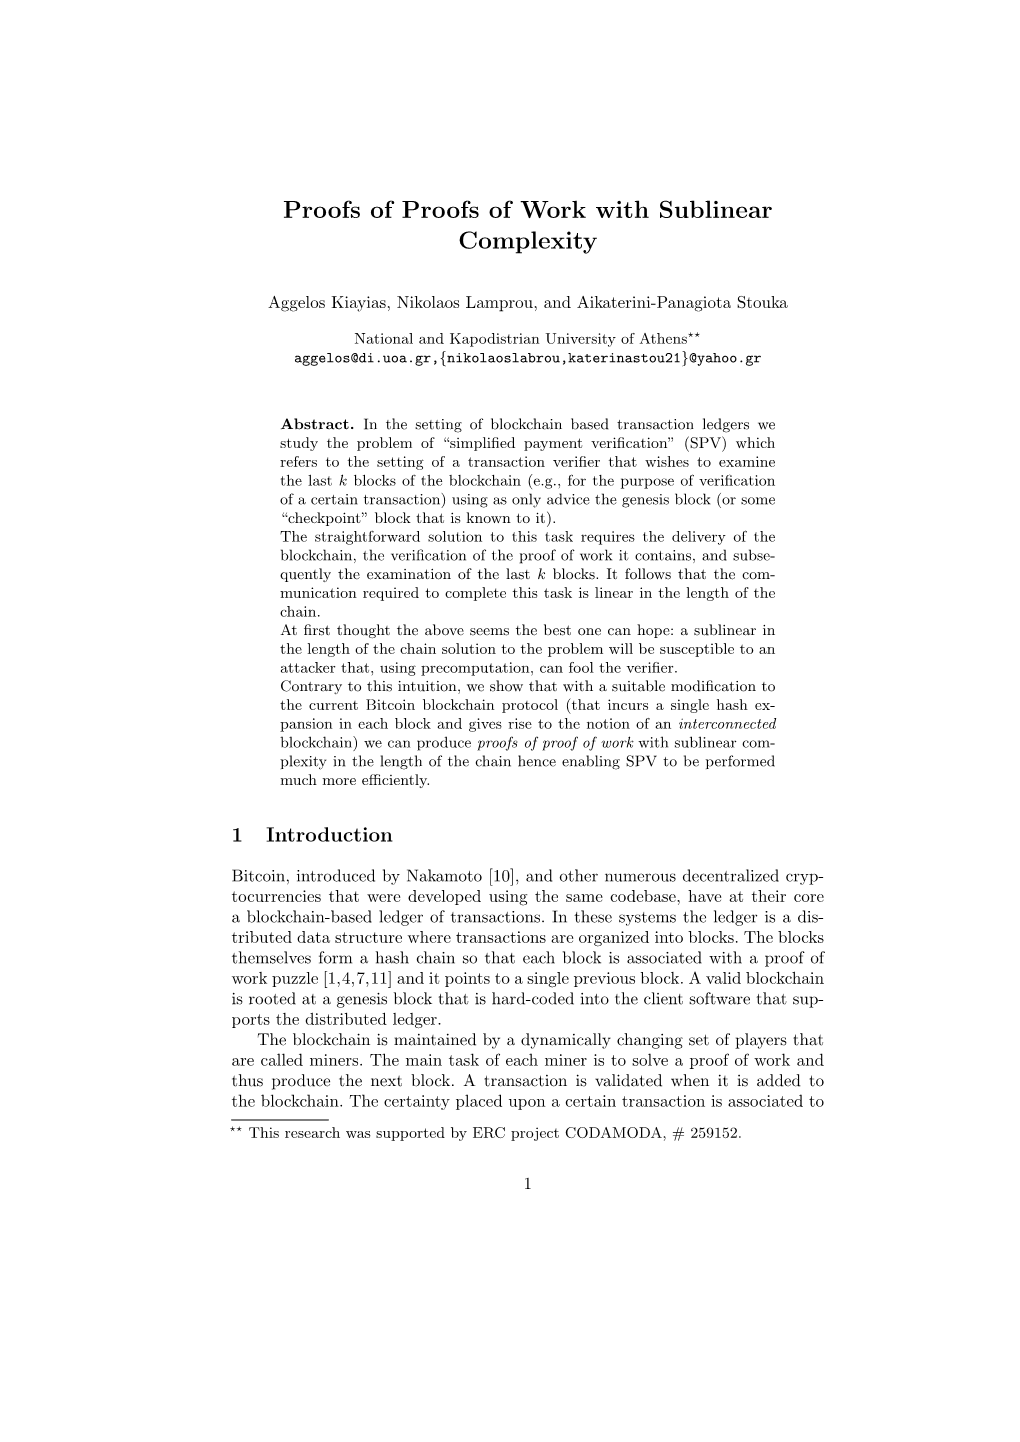 Proofs of Proofs of Work with Sublinear Complexity